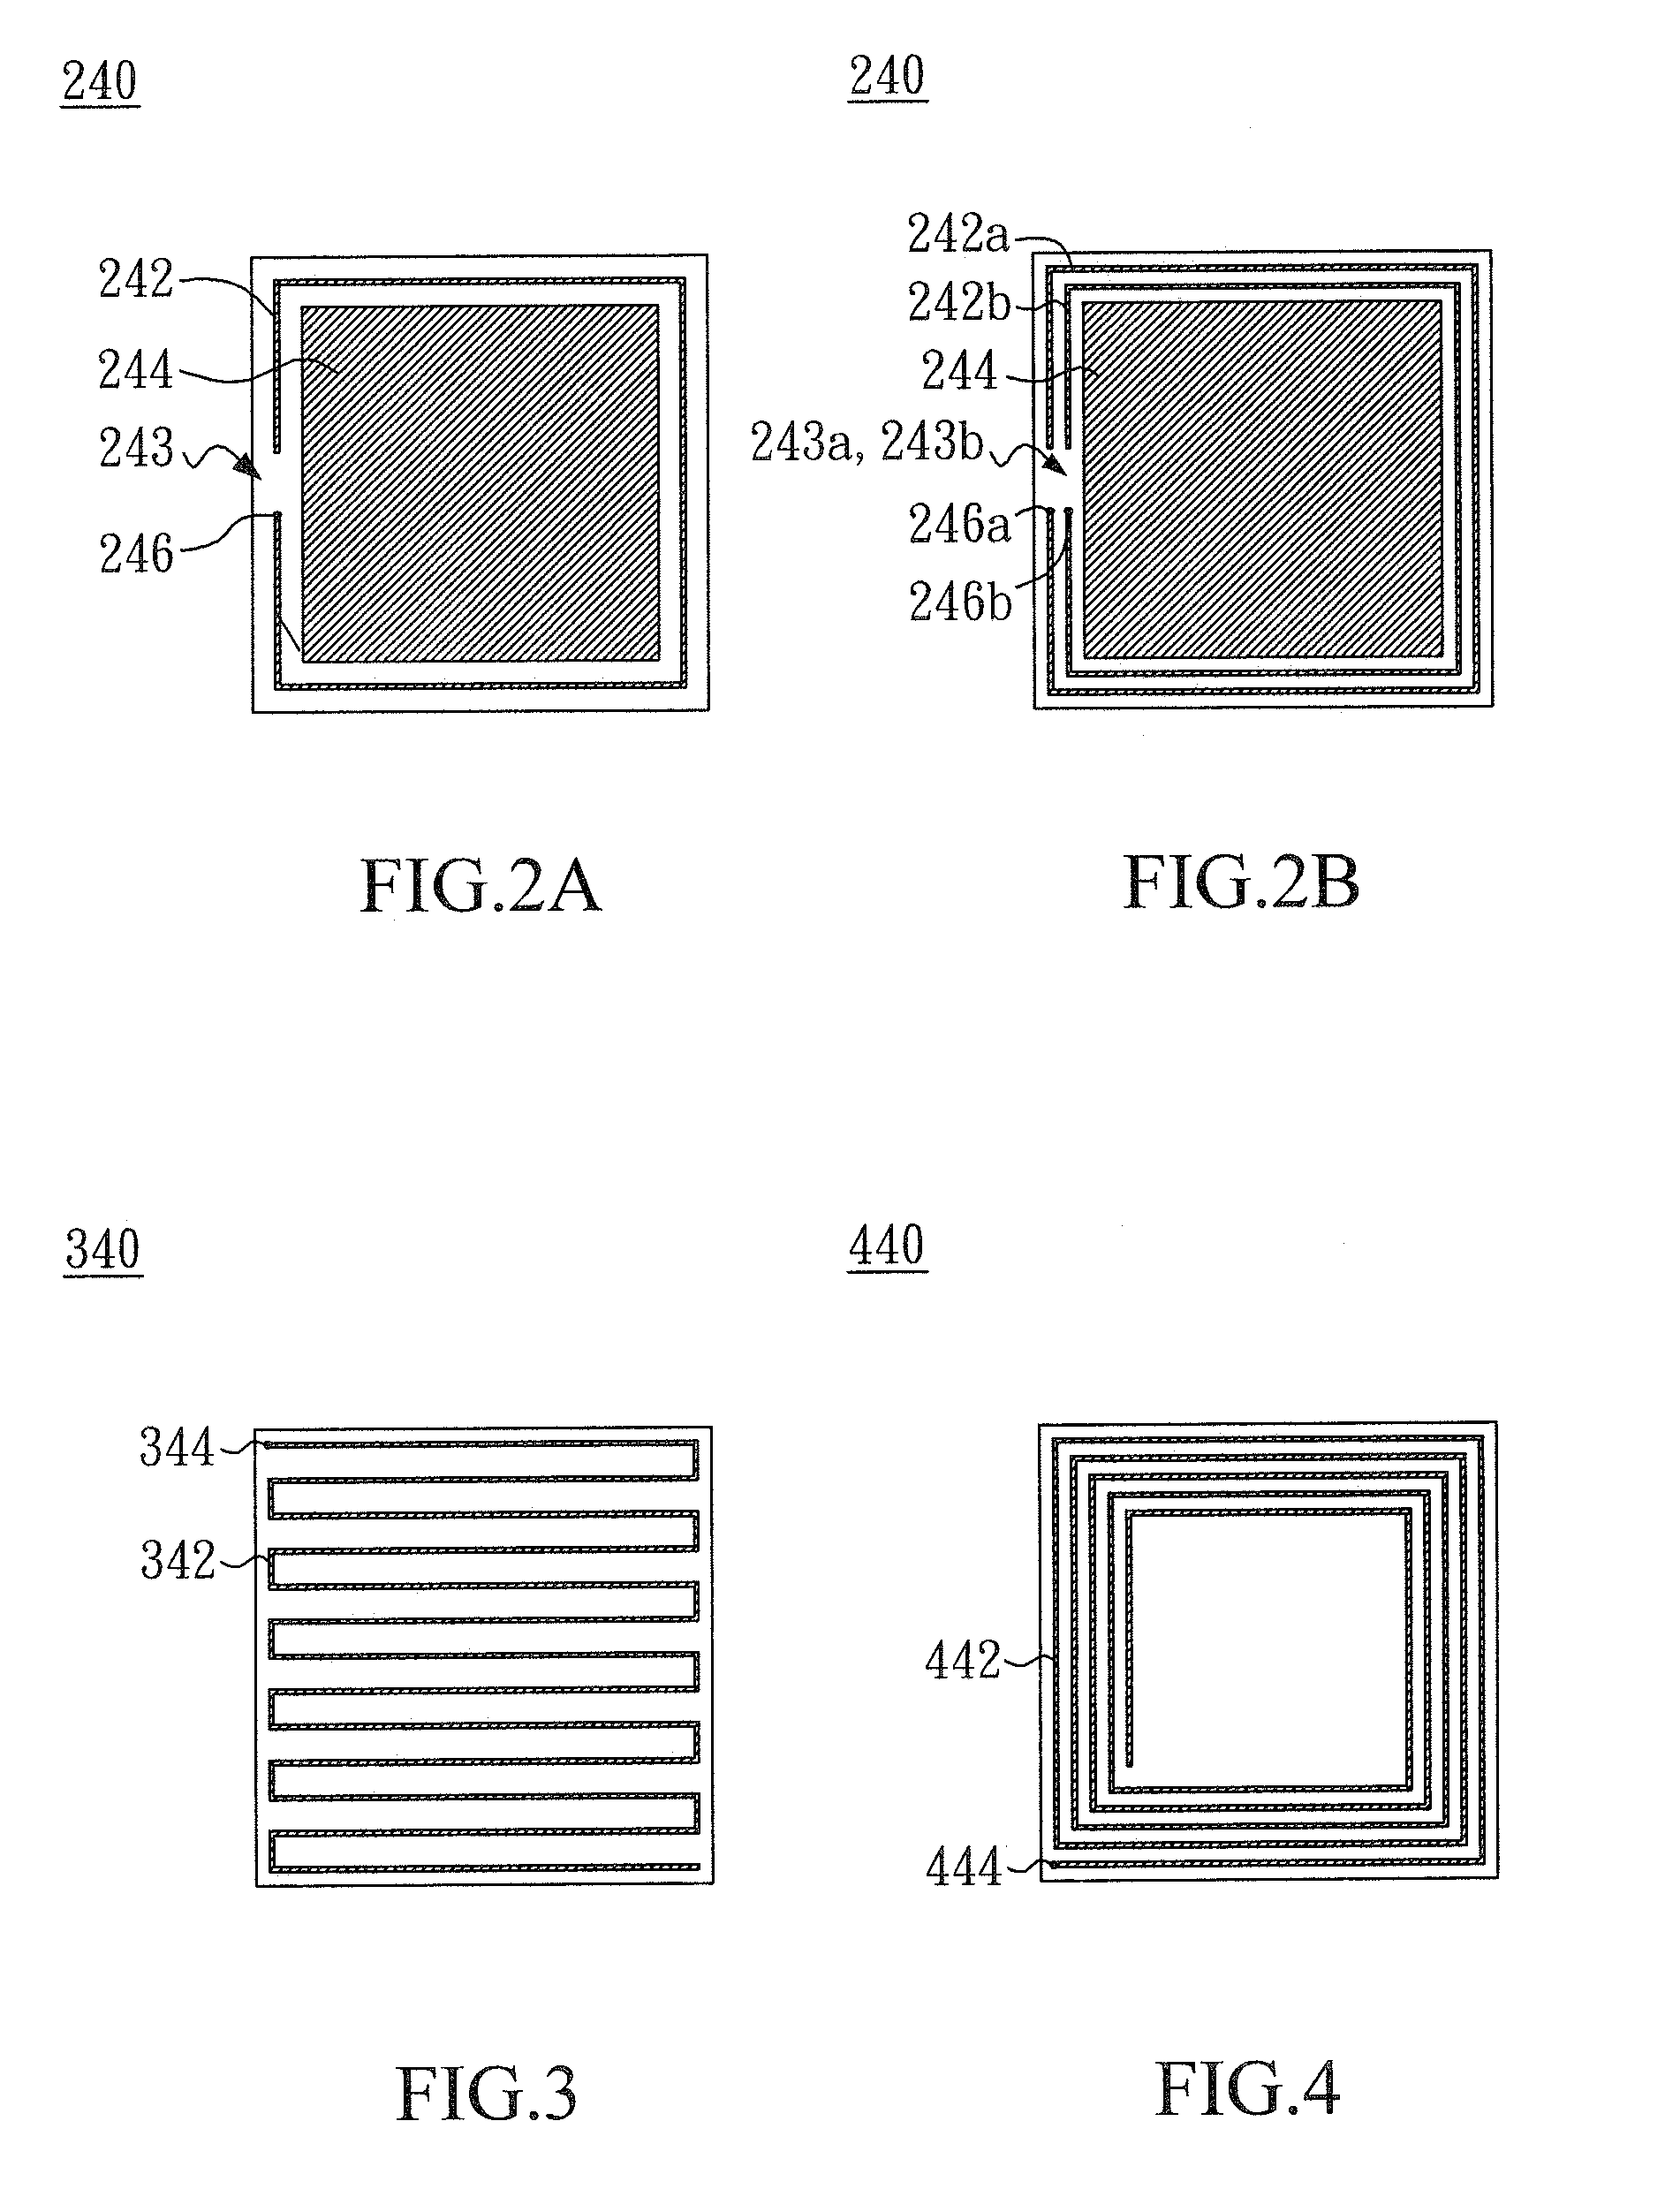 Structure of built-in self-test for pressure tester and method thereof